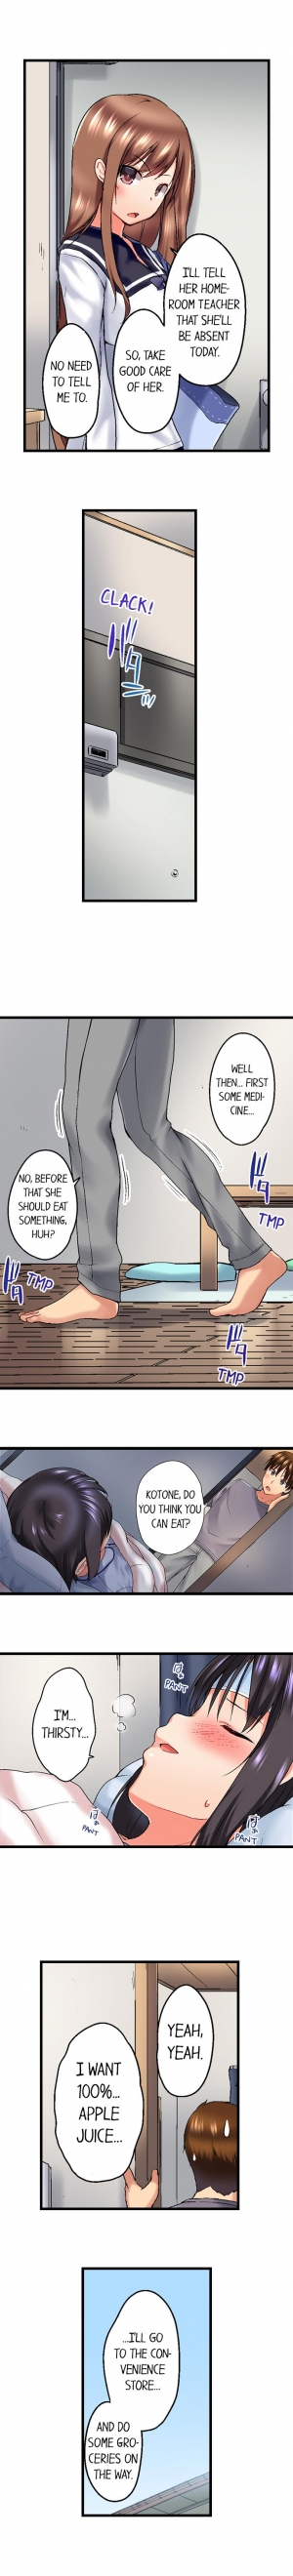 [Kaiduka] My Brother's Slipped Inside Me In The Bathtub (Ch.22 - 24) [English] (Ongoing) - Page 5